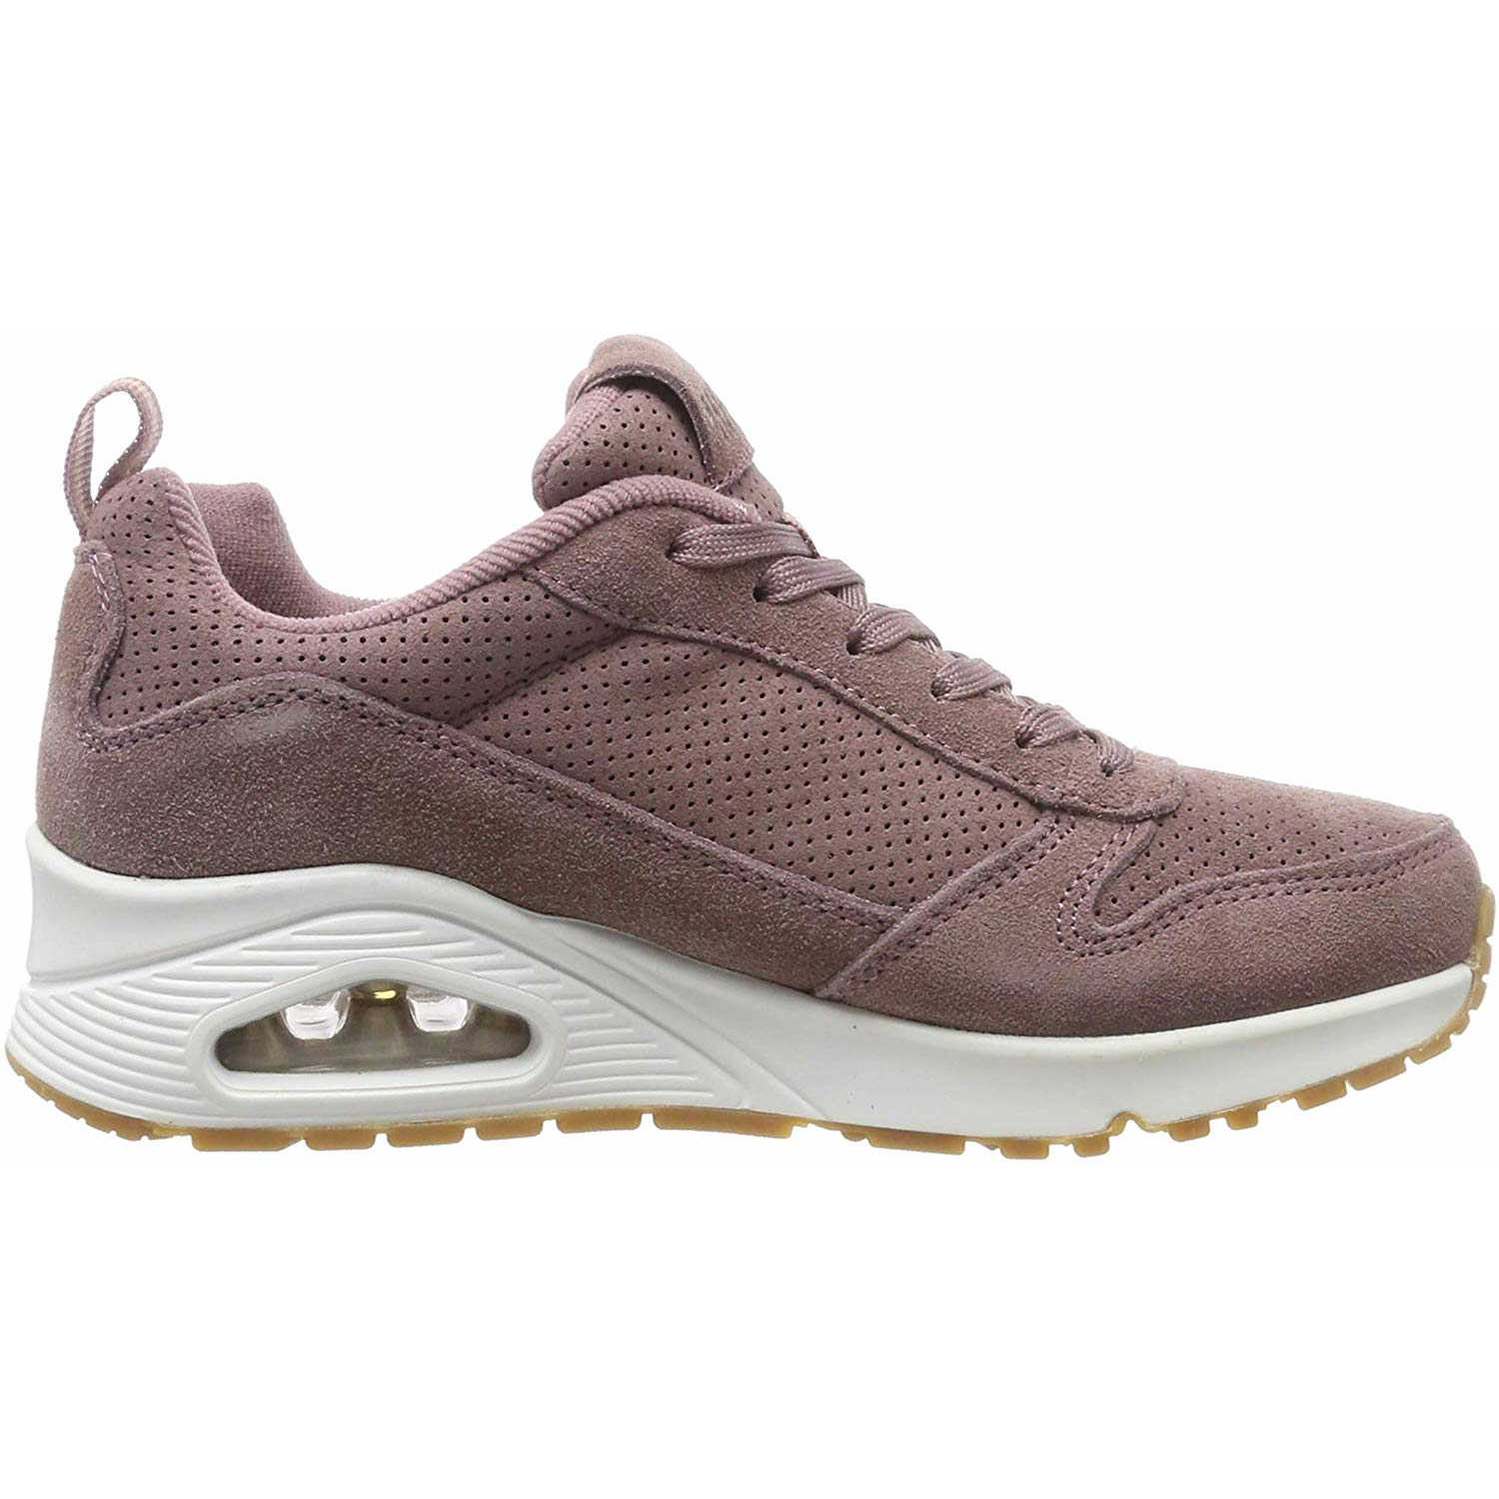 Skecher Street UNO TWO FOR THE SHOW Sneakers Damen mauve